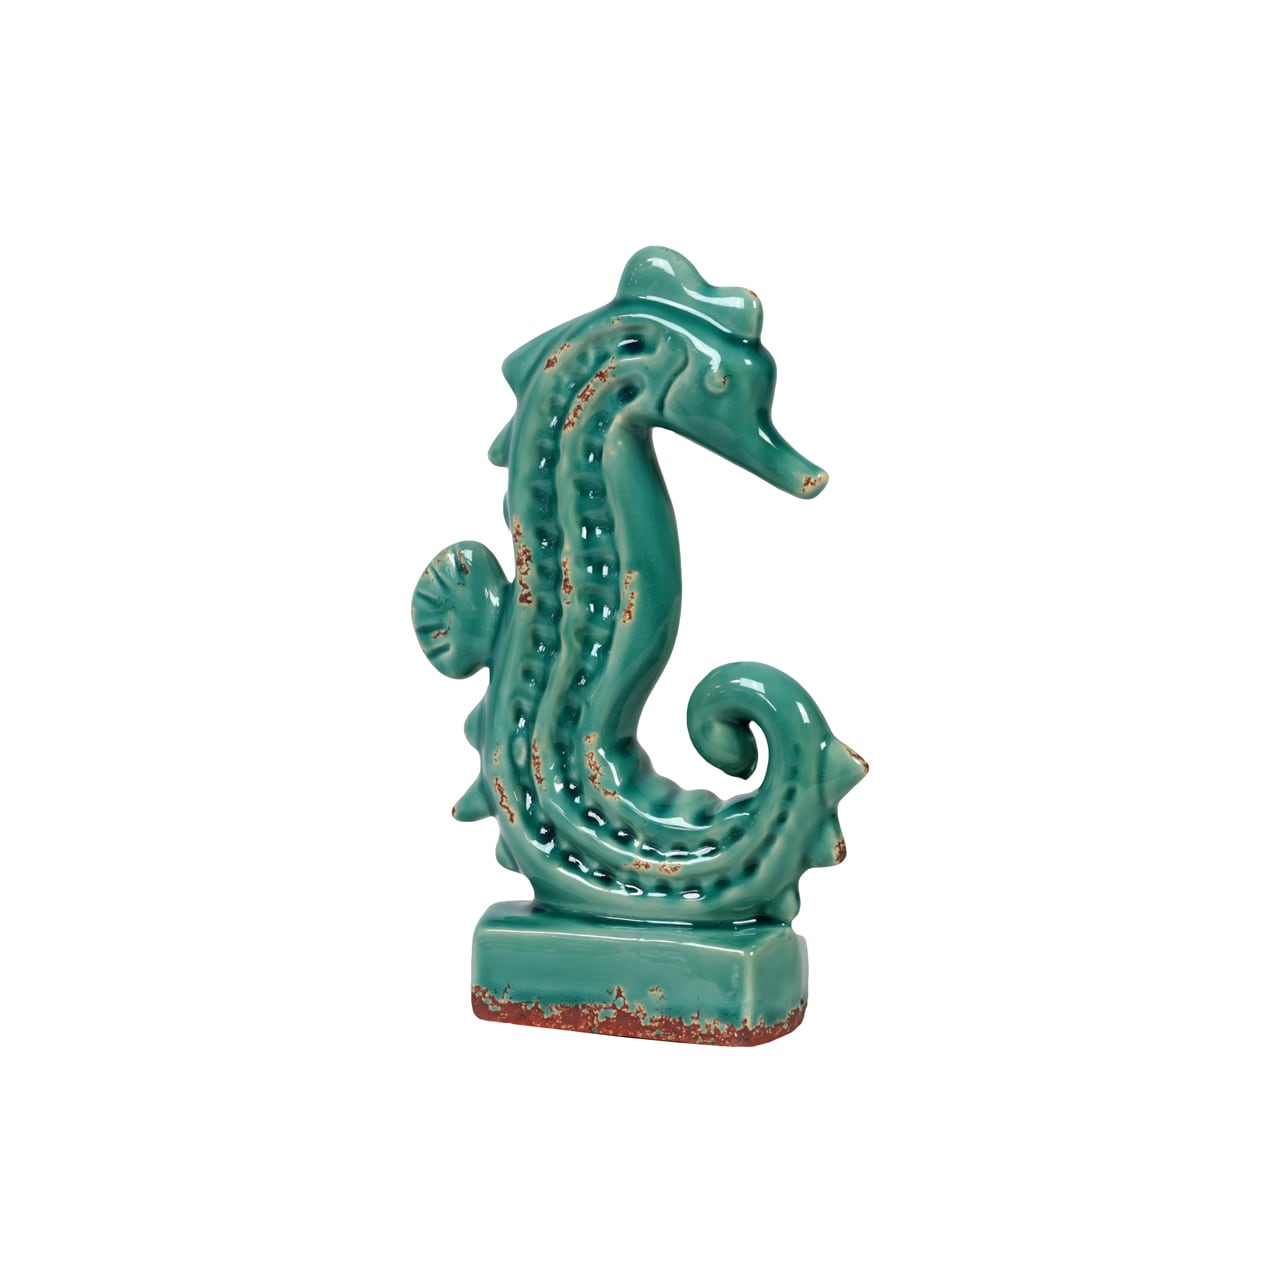 Urban Trends Collection Antique Blue Ceramic Seahorse (6.69 inches x 2.17 inches x 10.24 inchesUPC 877101108351For decorative purposes onlyDoes not hold water CeramicSize 6.69 inches x 2.17 inches x 10.24 inchesUPC 877101108351For decorative purposes o